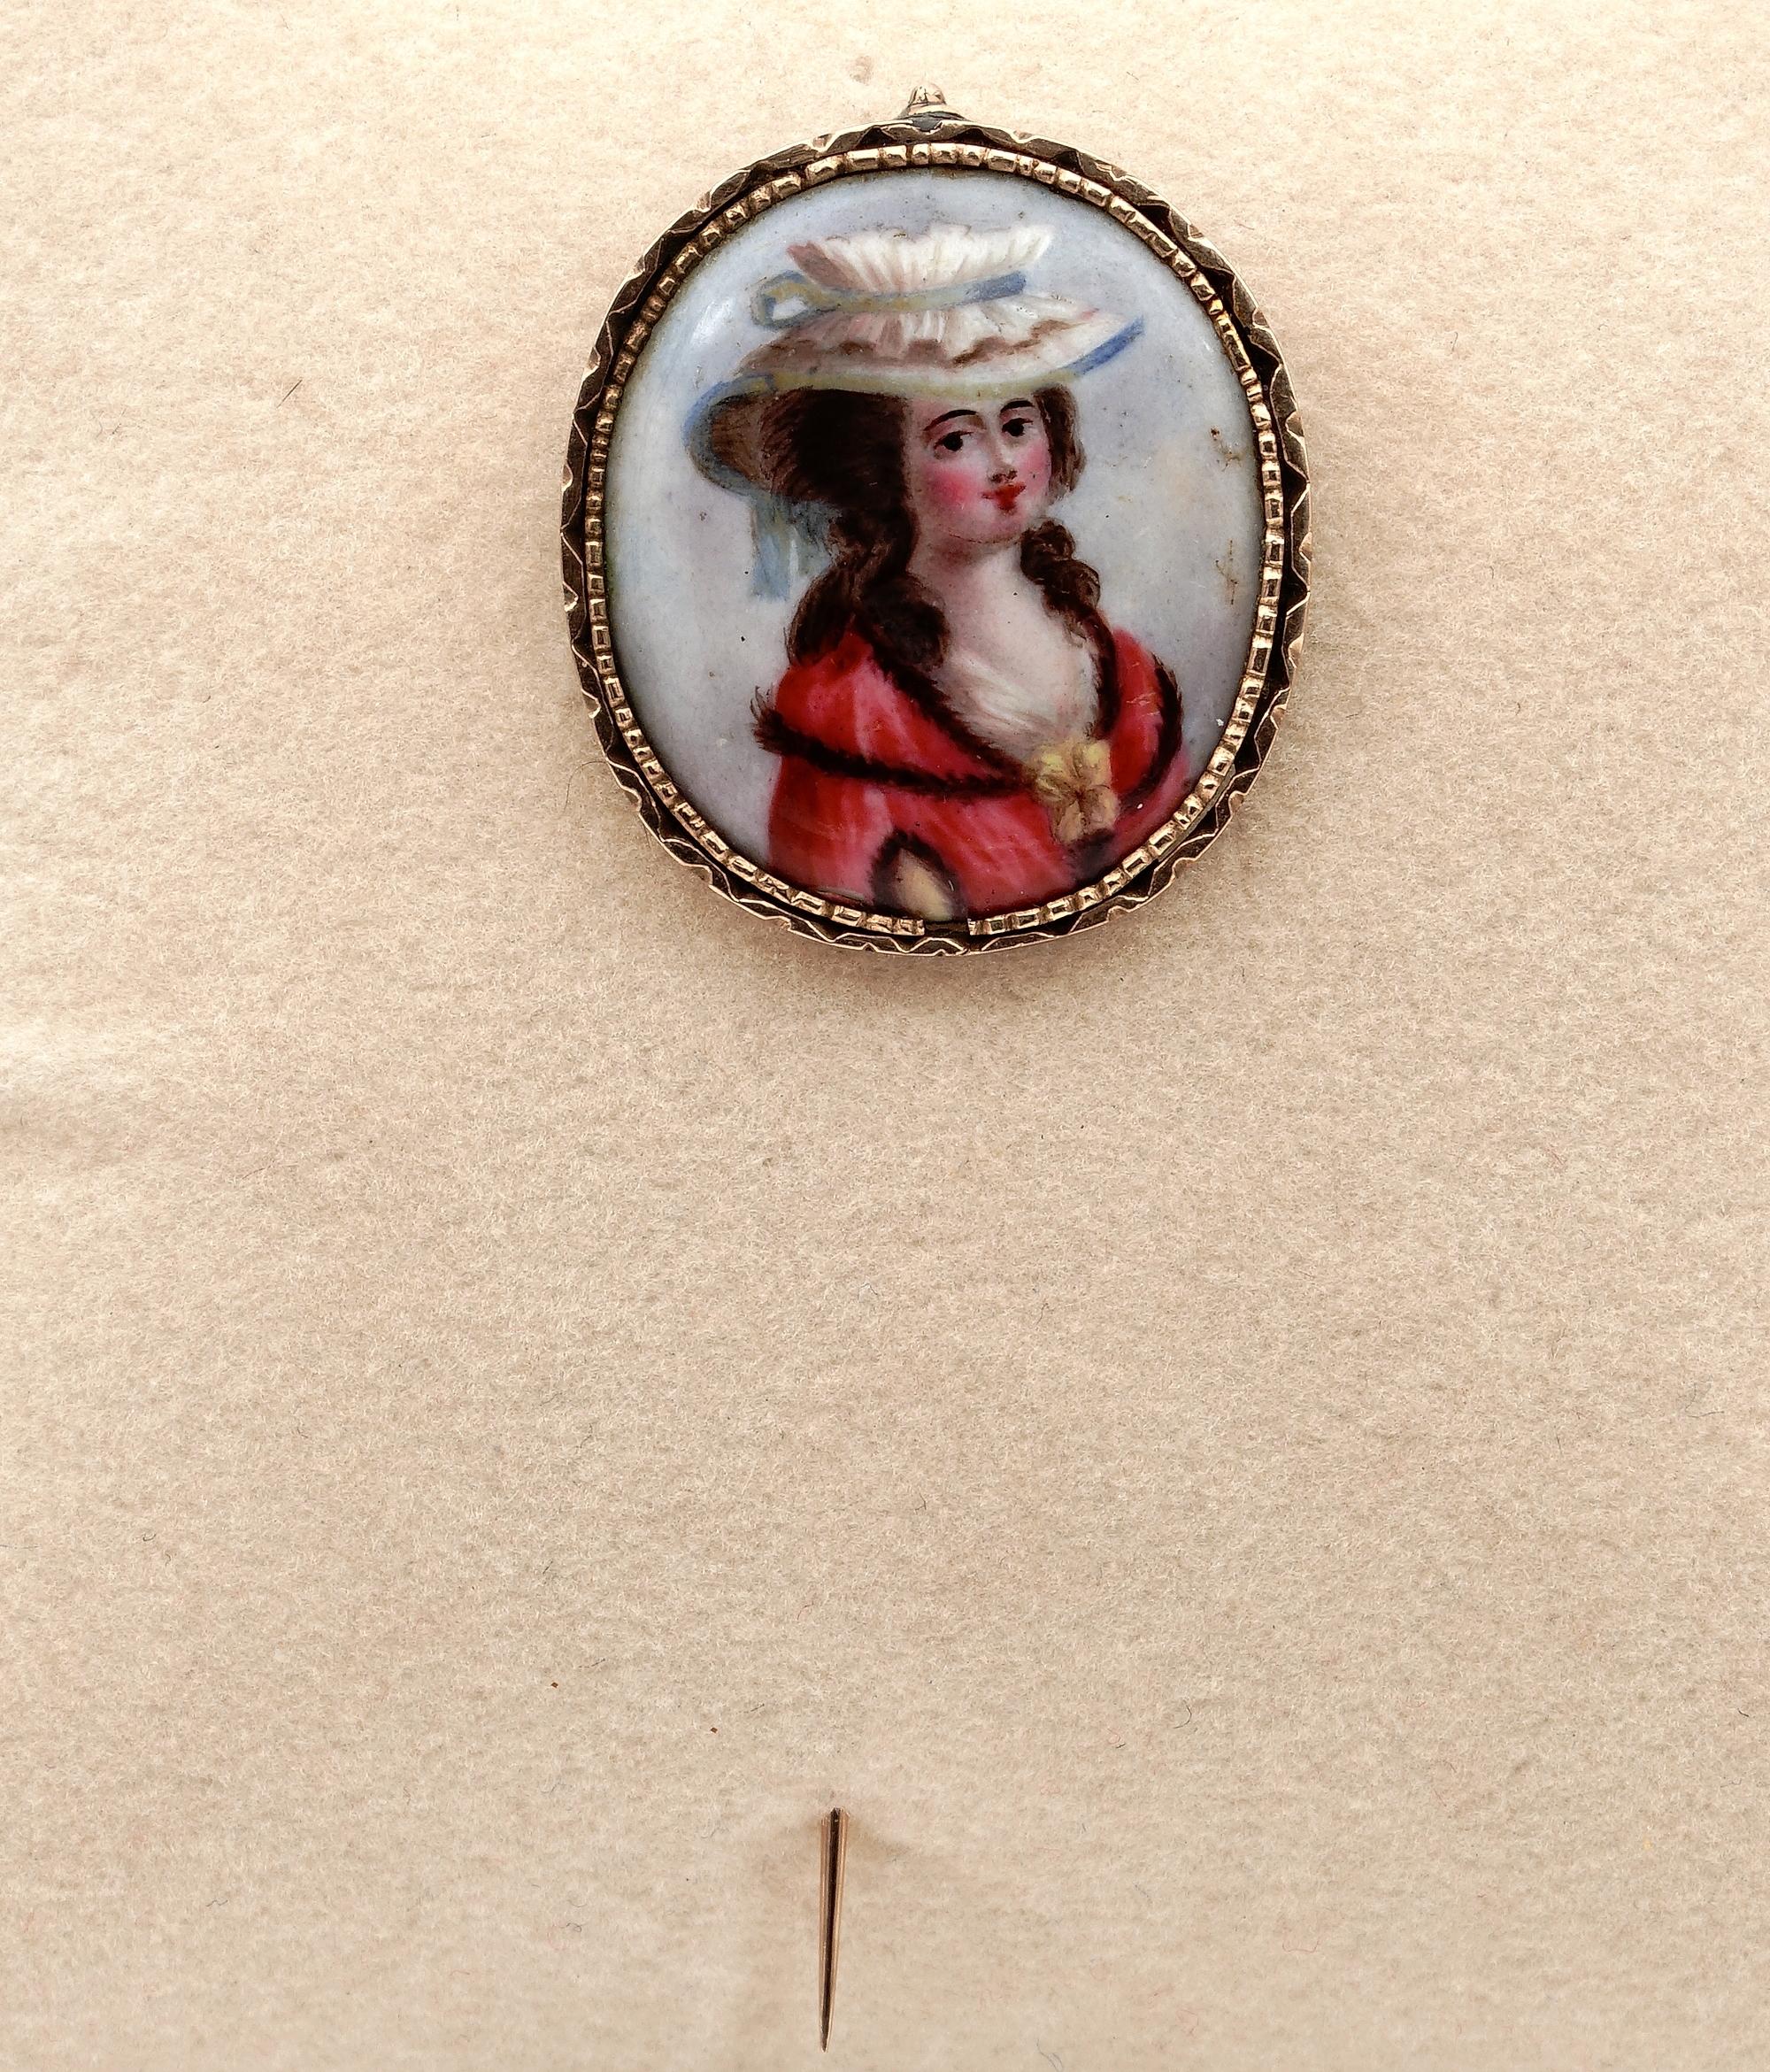 Georgian Beauty

Amazing enamel painted miniature depicting a Georgian lady in elegant outfit of the period
Artistry, skilfully painted of enamels on copper, 1780 ca
Beautiful colours, gorgeous face, elegant outfit
Large sized measuring 26 mm. x 22